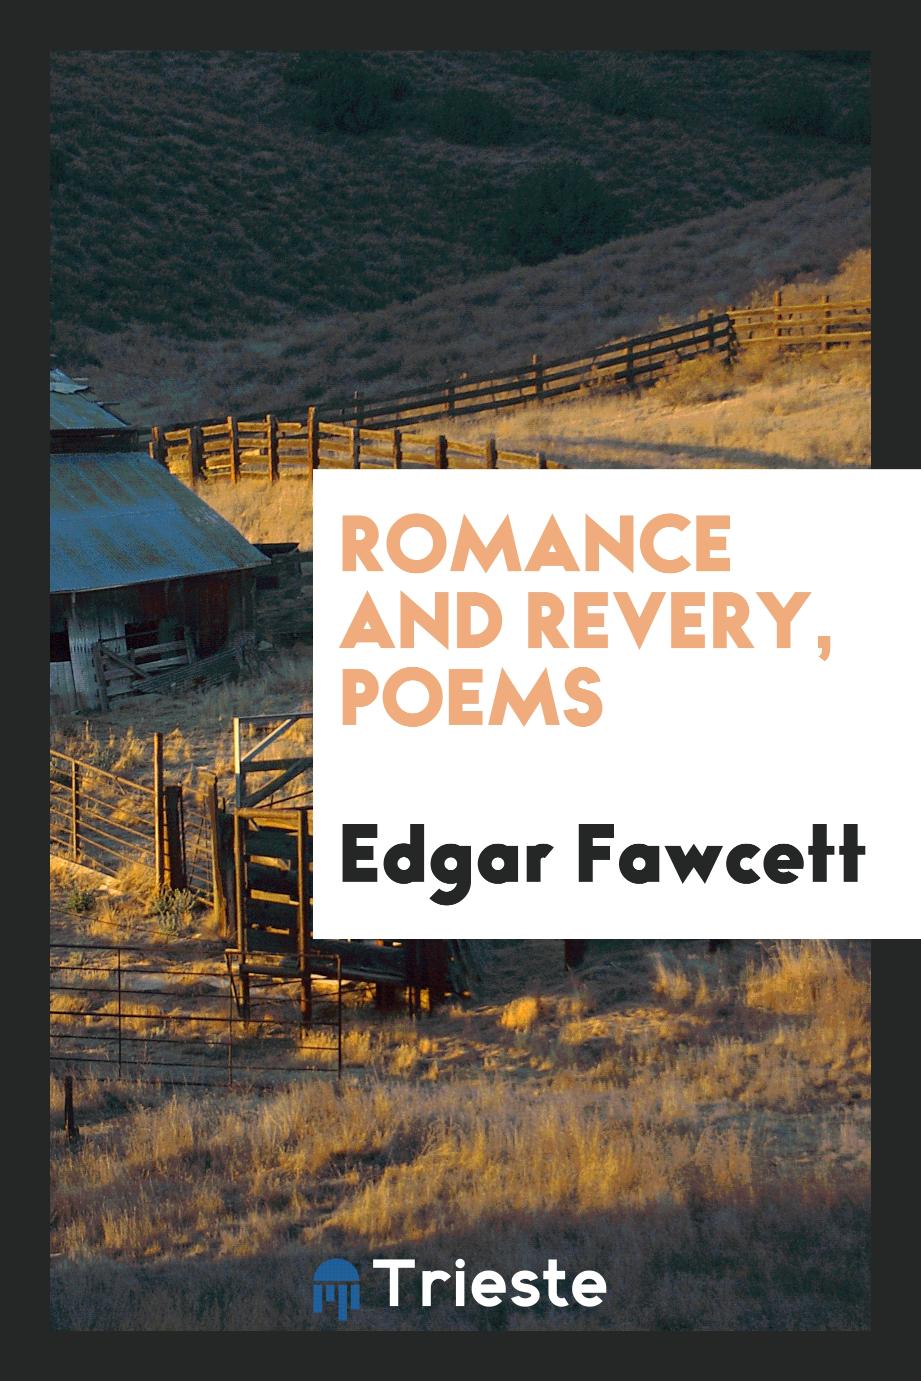 Romance and revery, poems